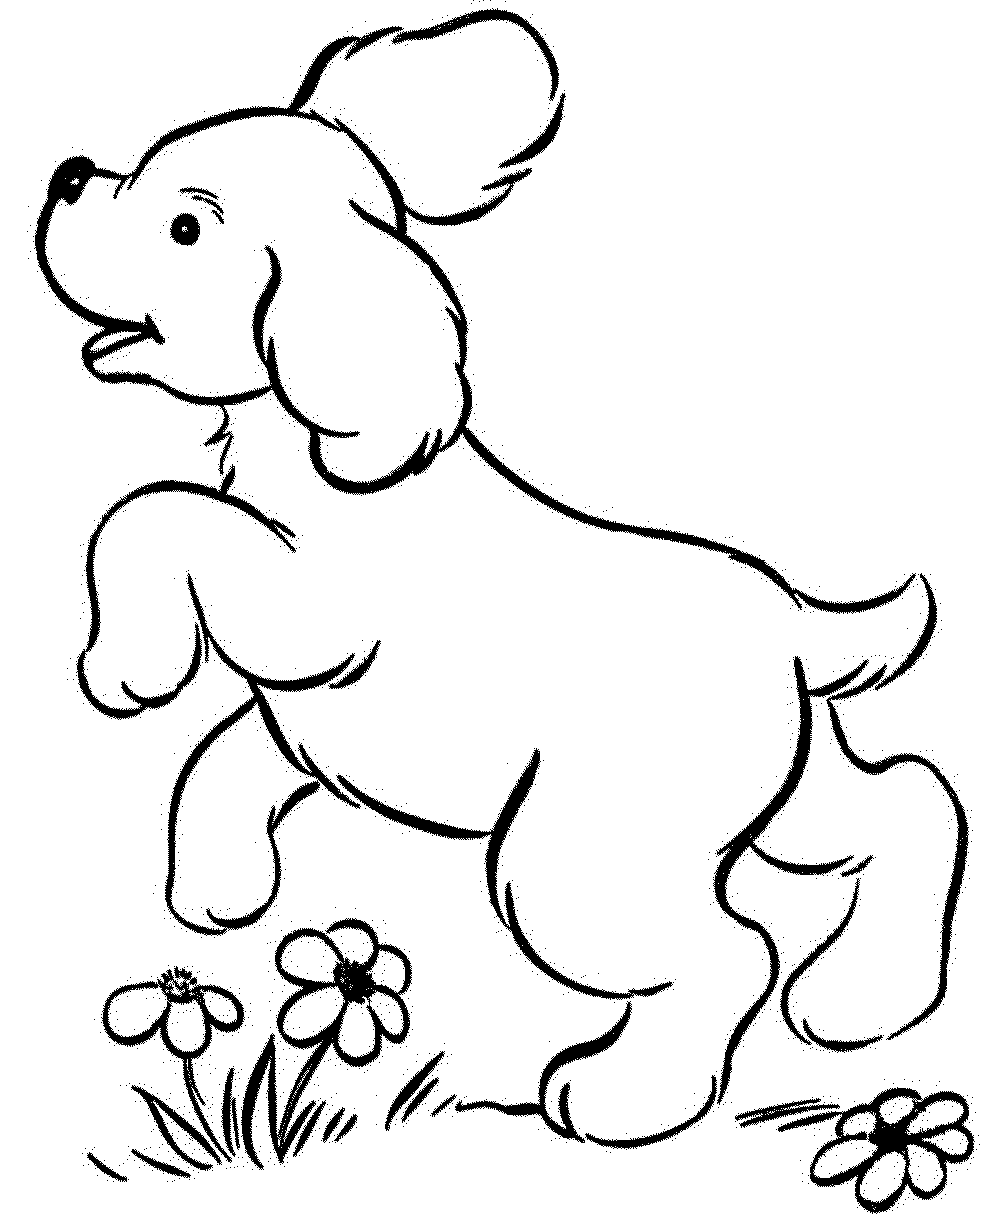 biscuit the dog coloring pages - Printable Kids Colouring Pages